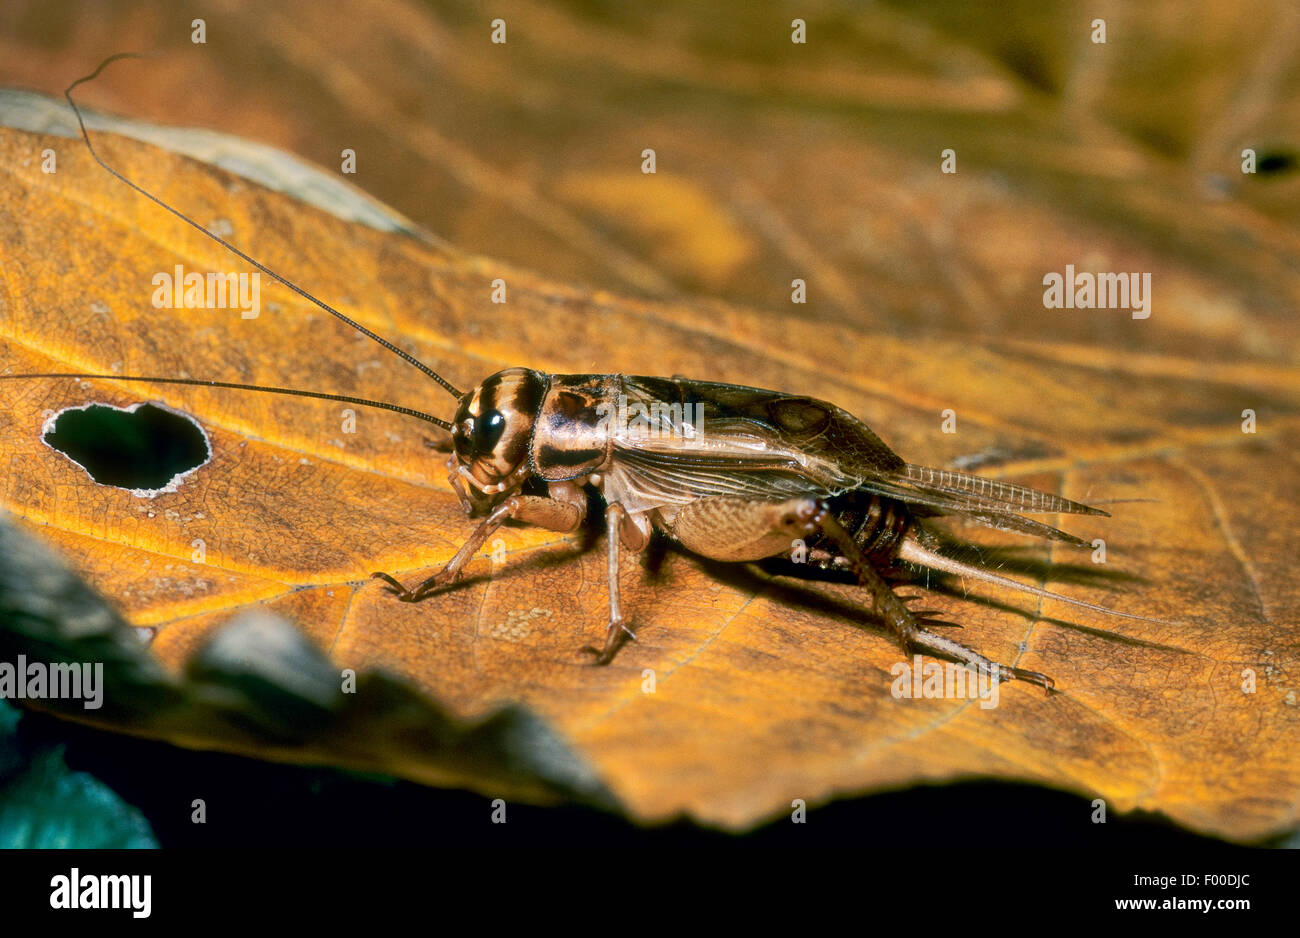 House cricket, Domestic cricket, Domestic gray cricket (Acheta domesticus, Acheta domestica, Gryllulus domesticus), on a brown leaf, Germany Stock Photo